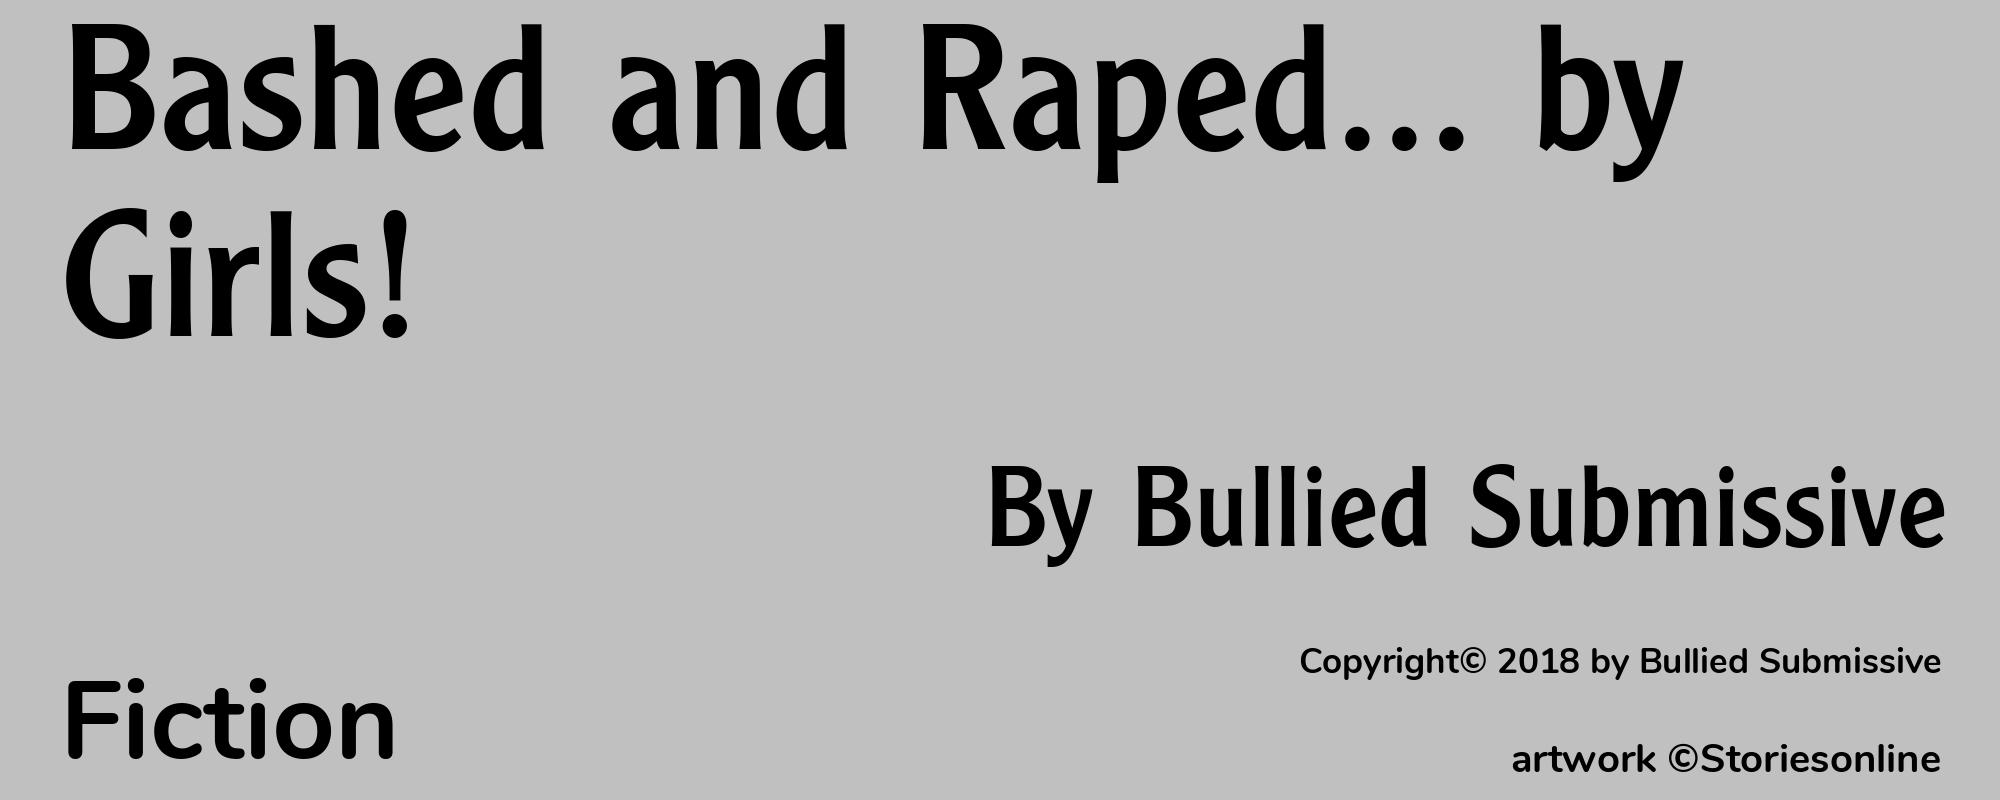 Bashed and Raped... by Girls! - Cover